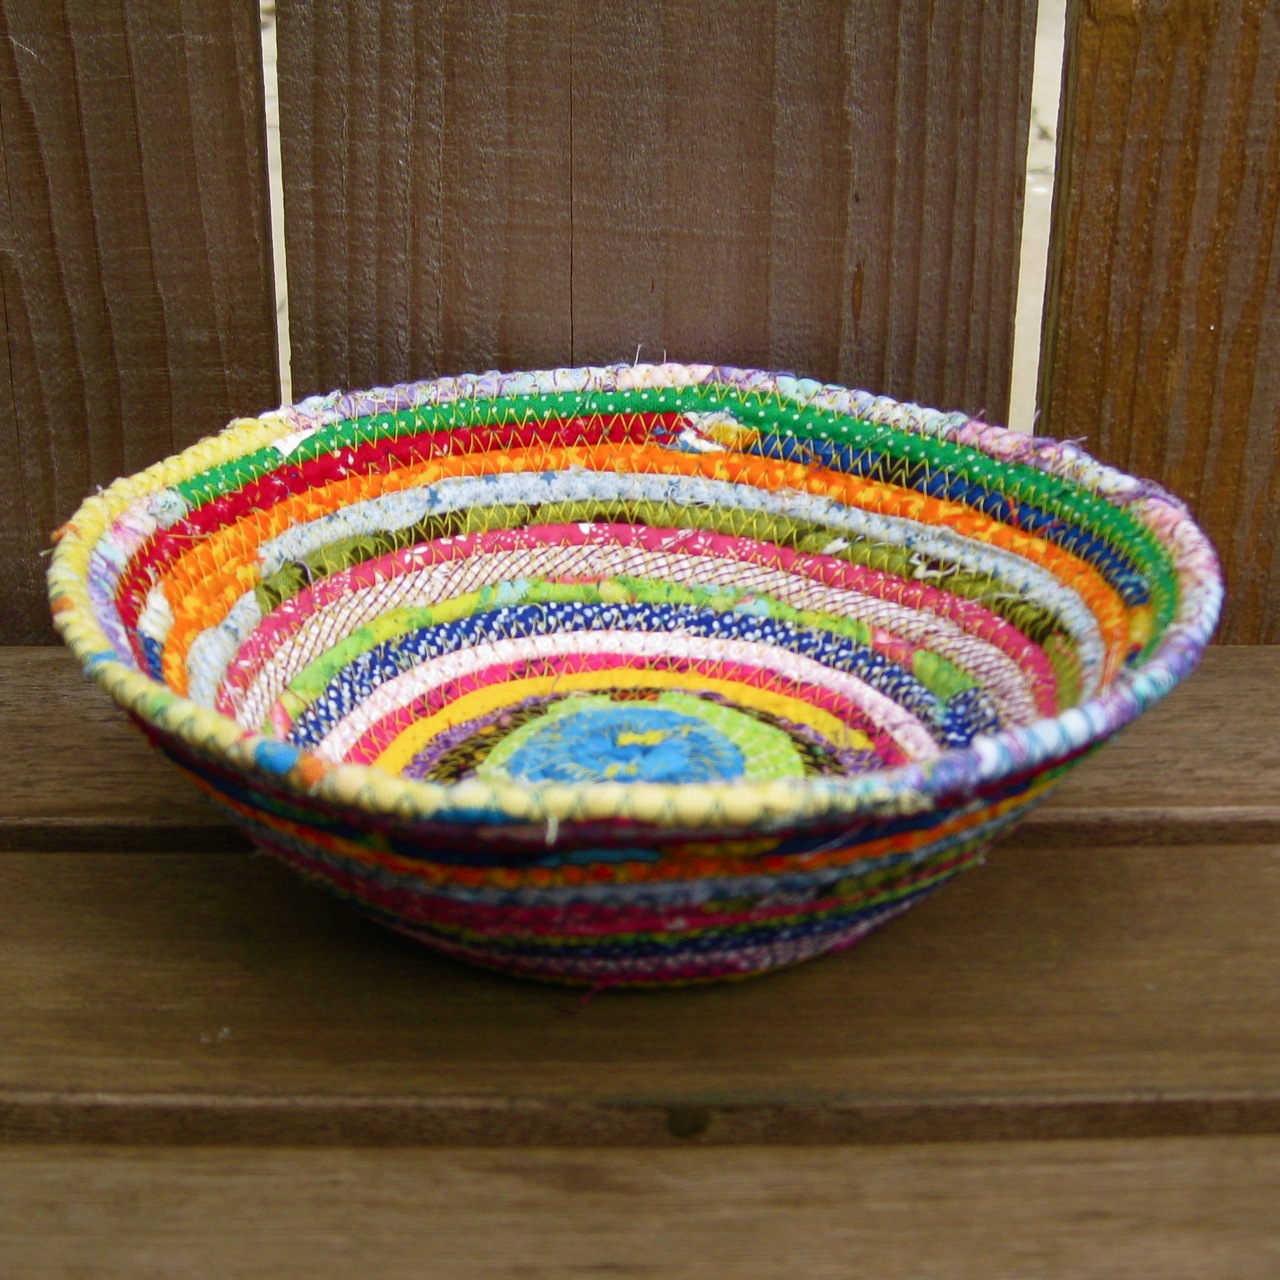 coiled fabric bowls part 2